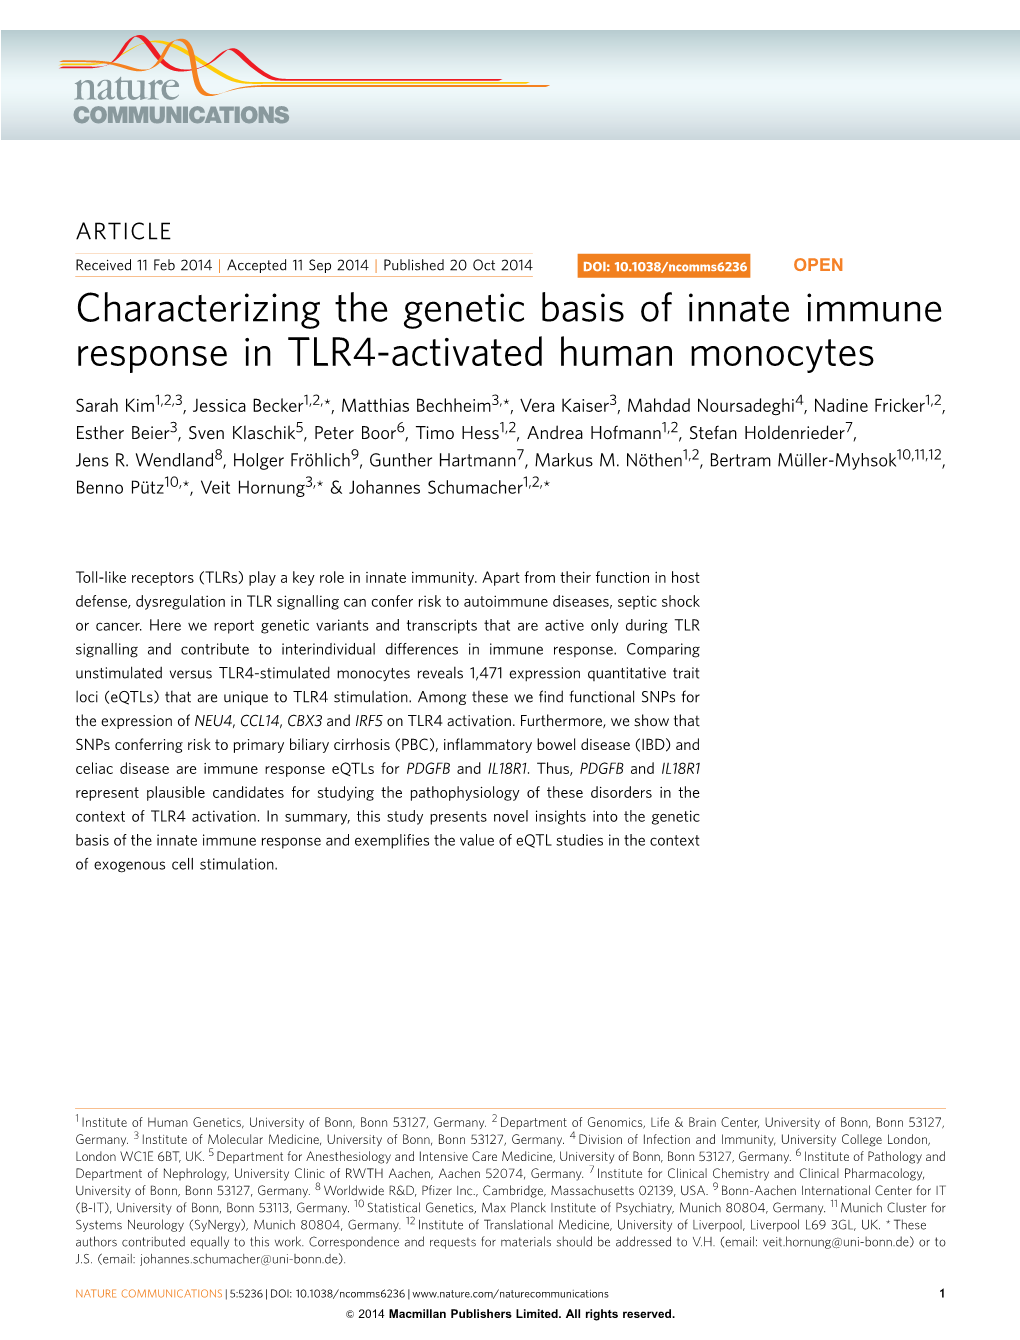 Characterizing the Genetic Basis of Innate Immune Response in TLR4-Activated Human Monocytes